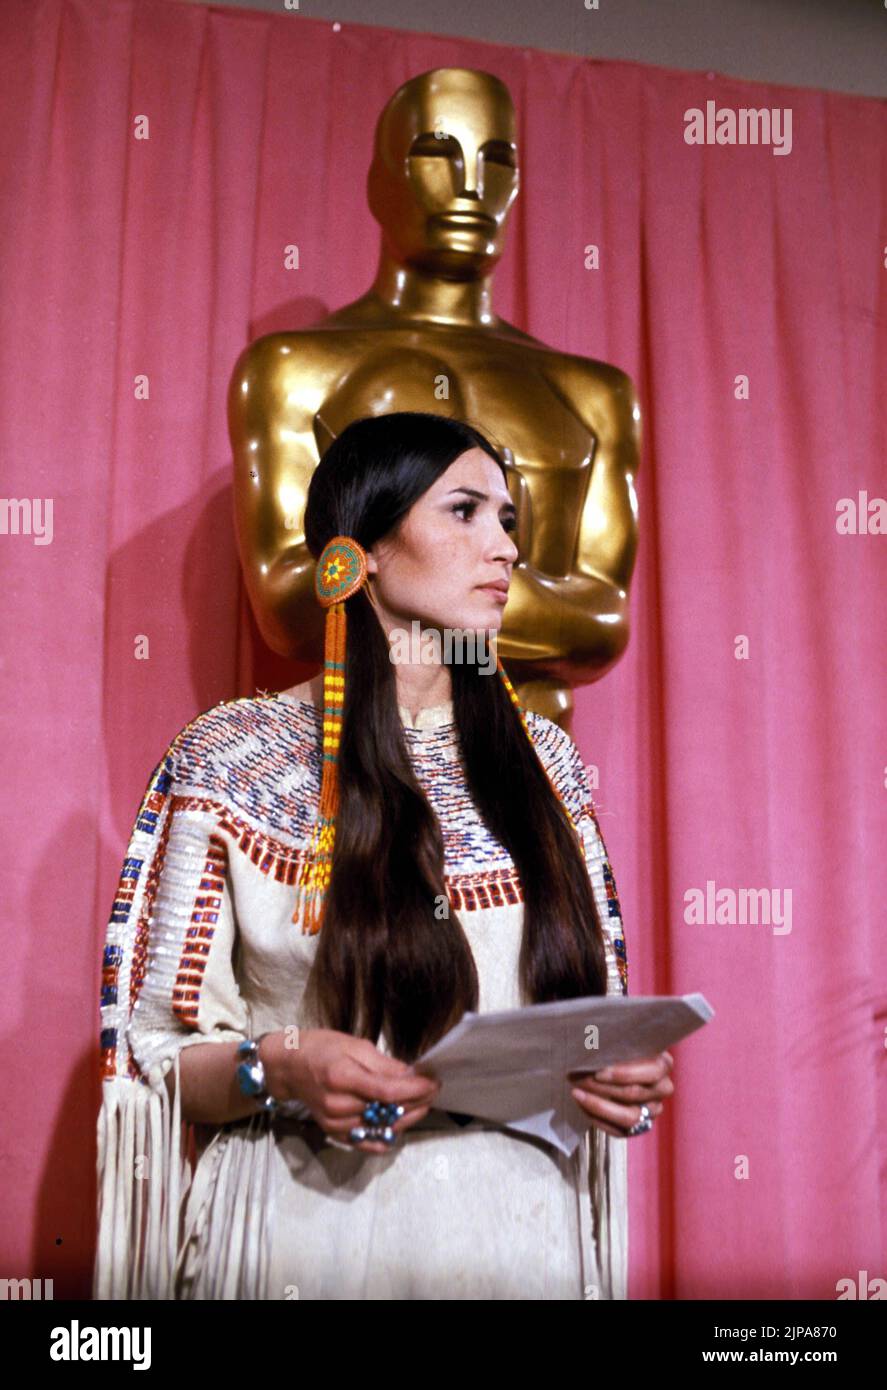 Aug 16, 2022: The Academy has apologized to SACHEEN LITTLEFEATHER, a Native American activist and actress booed off stage at the Oscars nearly 50 years ago. She appeared on live TV in 1973 to refuse an Oscar on behalf of Marlon Brando, who had won the best actor prize for The Godfather. Brando rejected the award because of misrepresentation of Native Americans by the US film industry. FILE PHOTO SHOT ON: 1973, Los Angeles, USA: Sacheen Littlefeather gives speech during 1973 Academy Awards. (Credit Image: © Globe Photos/ZUMA Wire) Stock Photo